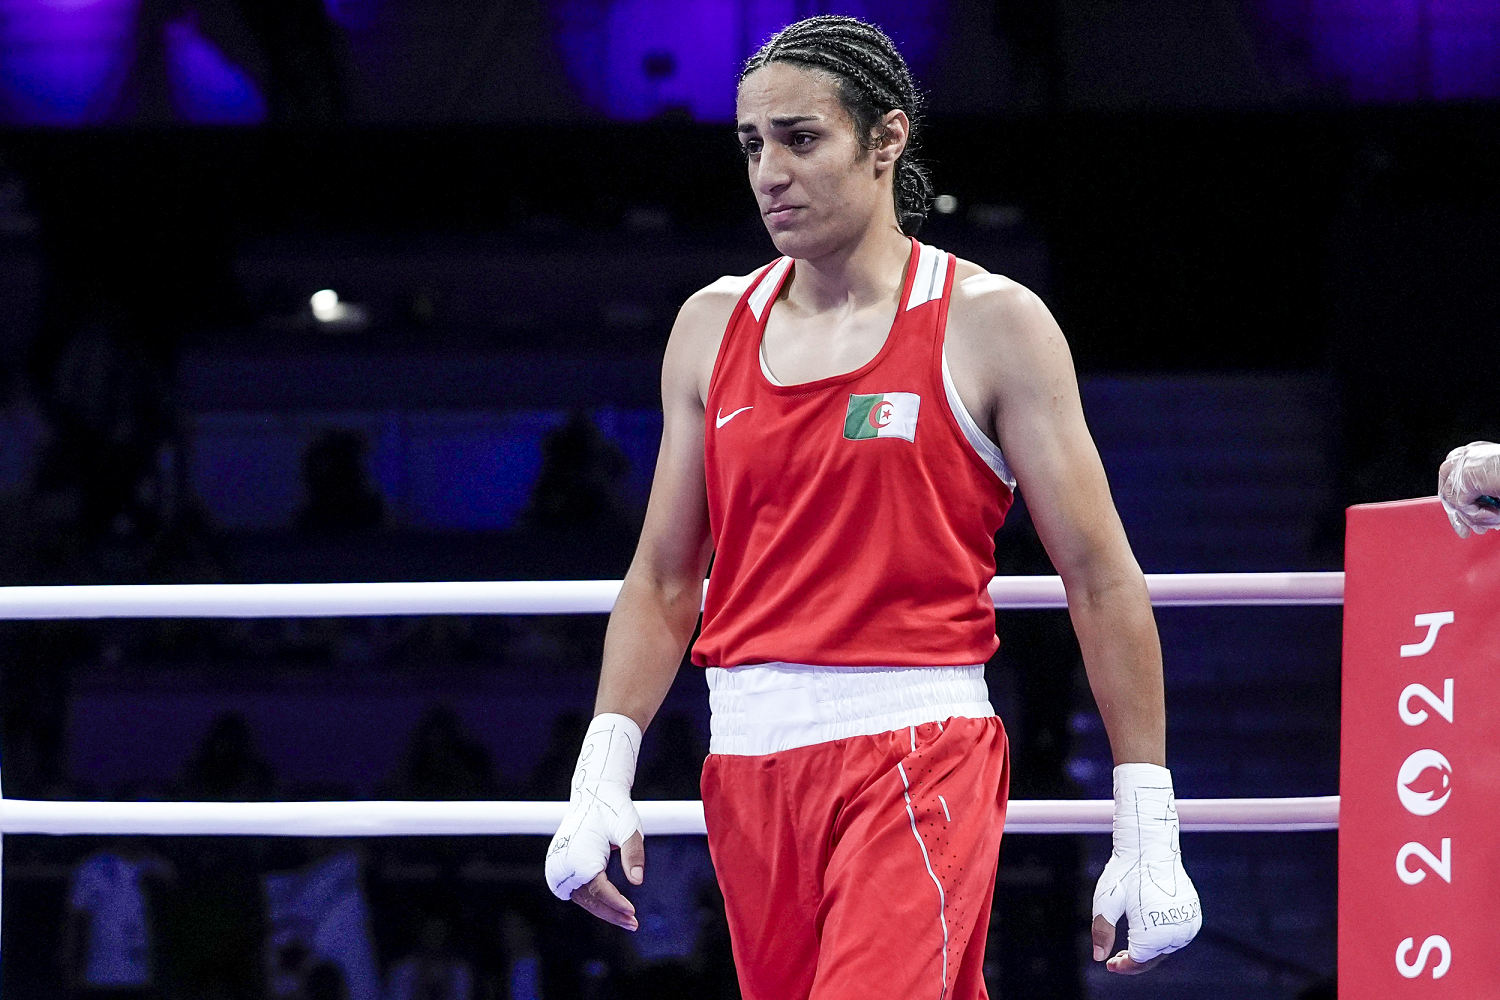 Olympic boxer at center of gender dispute calls for end to 'bullying' of athletes